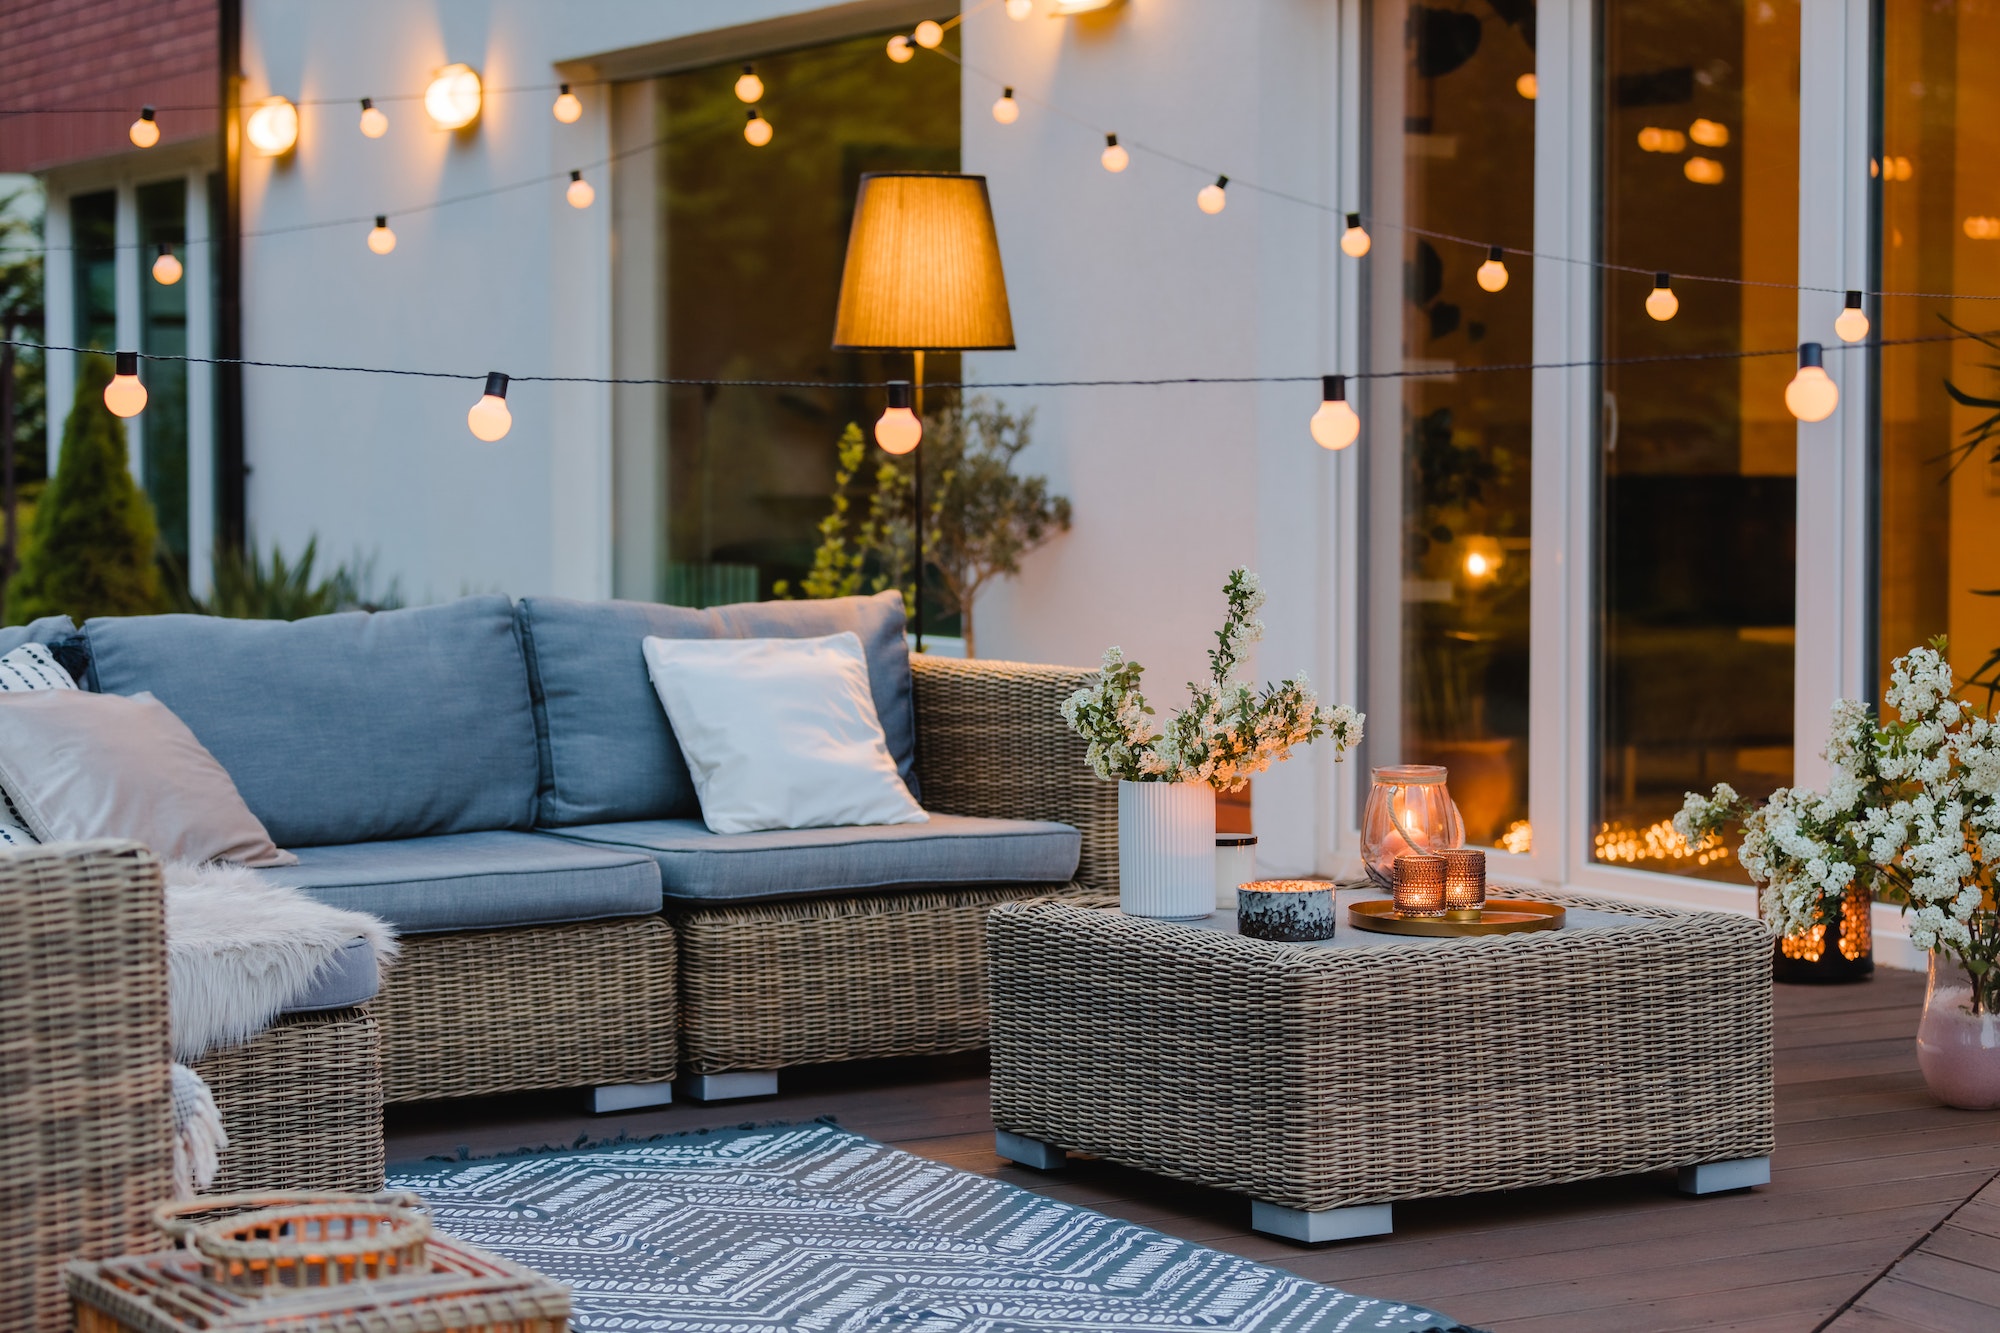 Patio Furniture Essentials: Choosing the Right Pieces for Comfort and Style